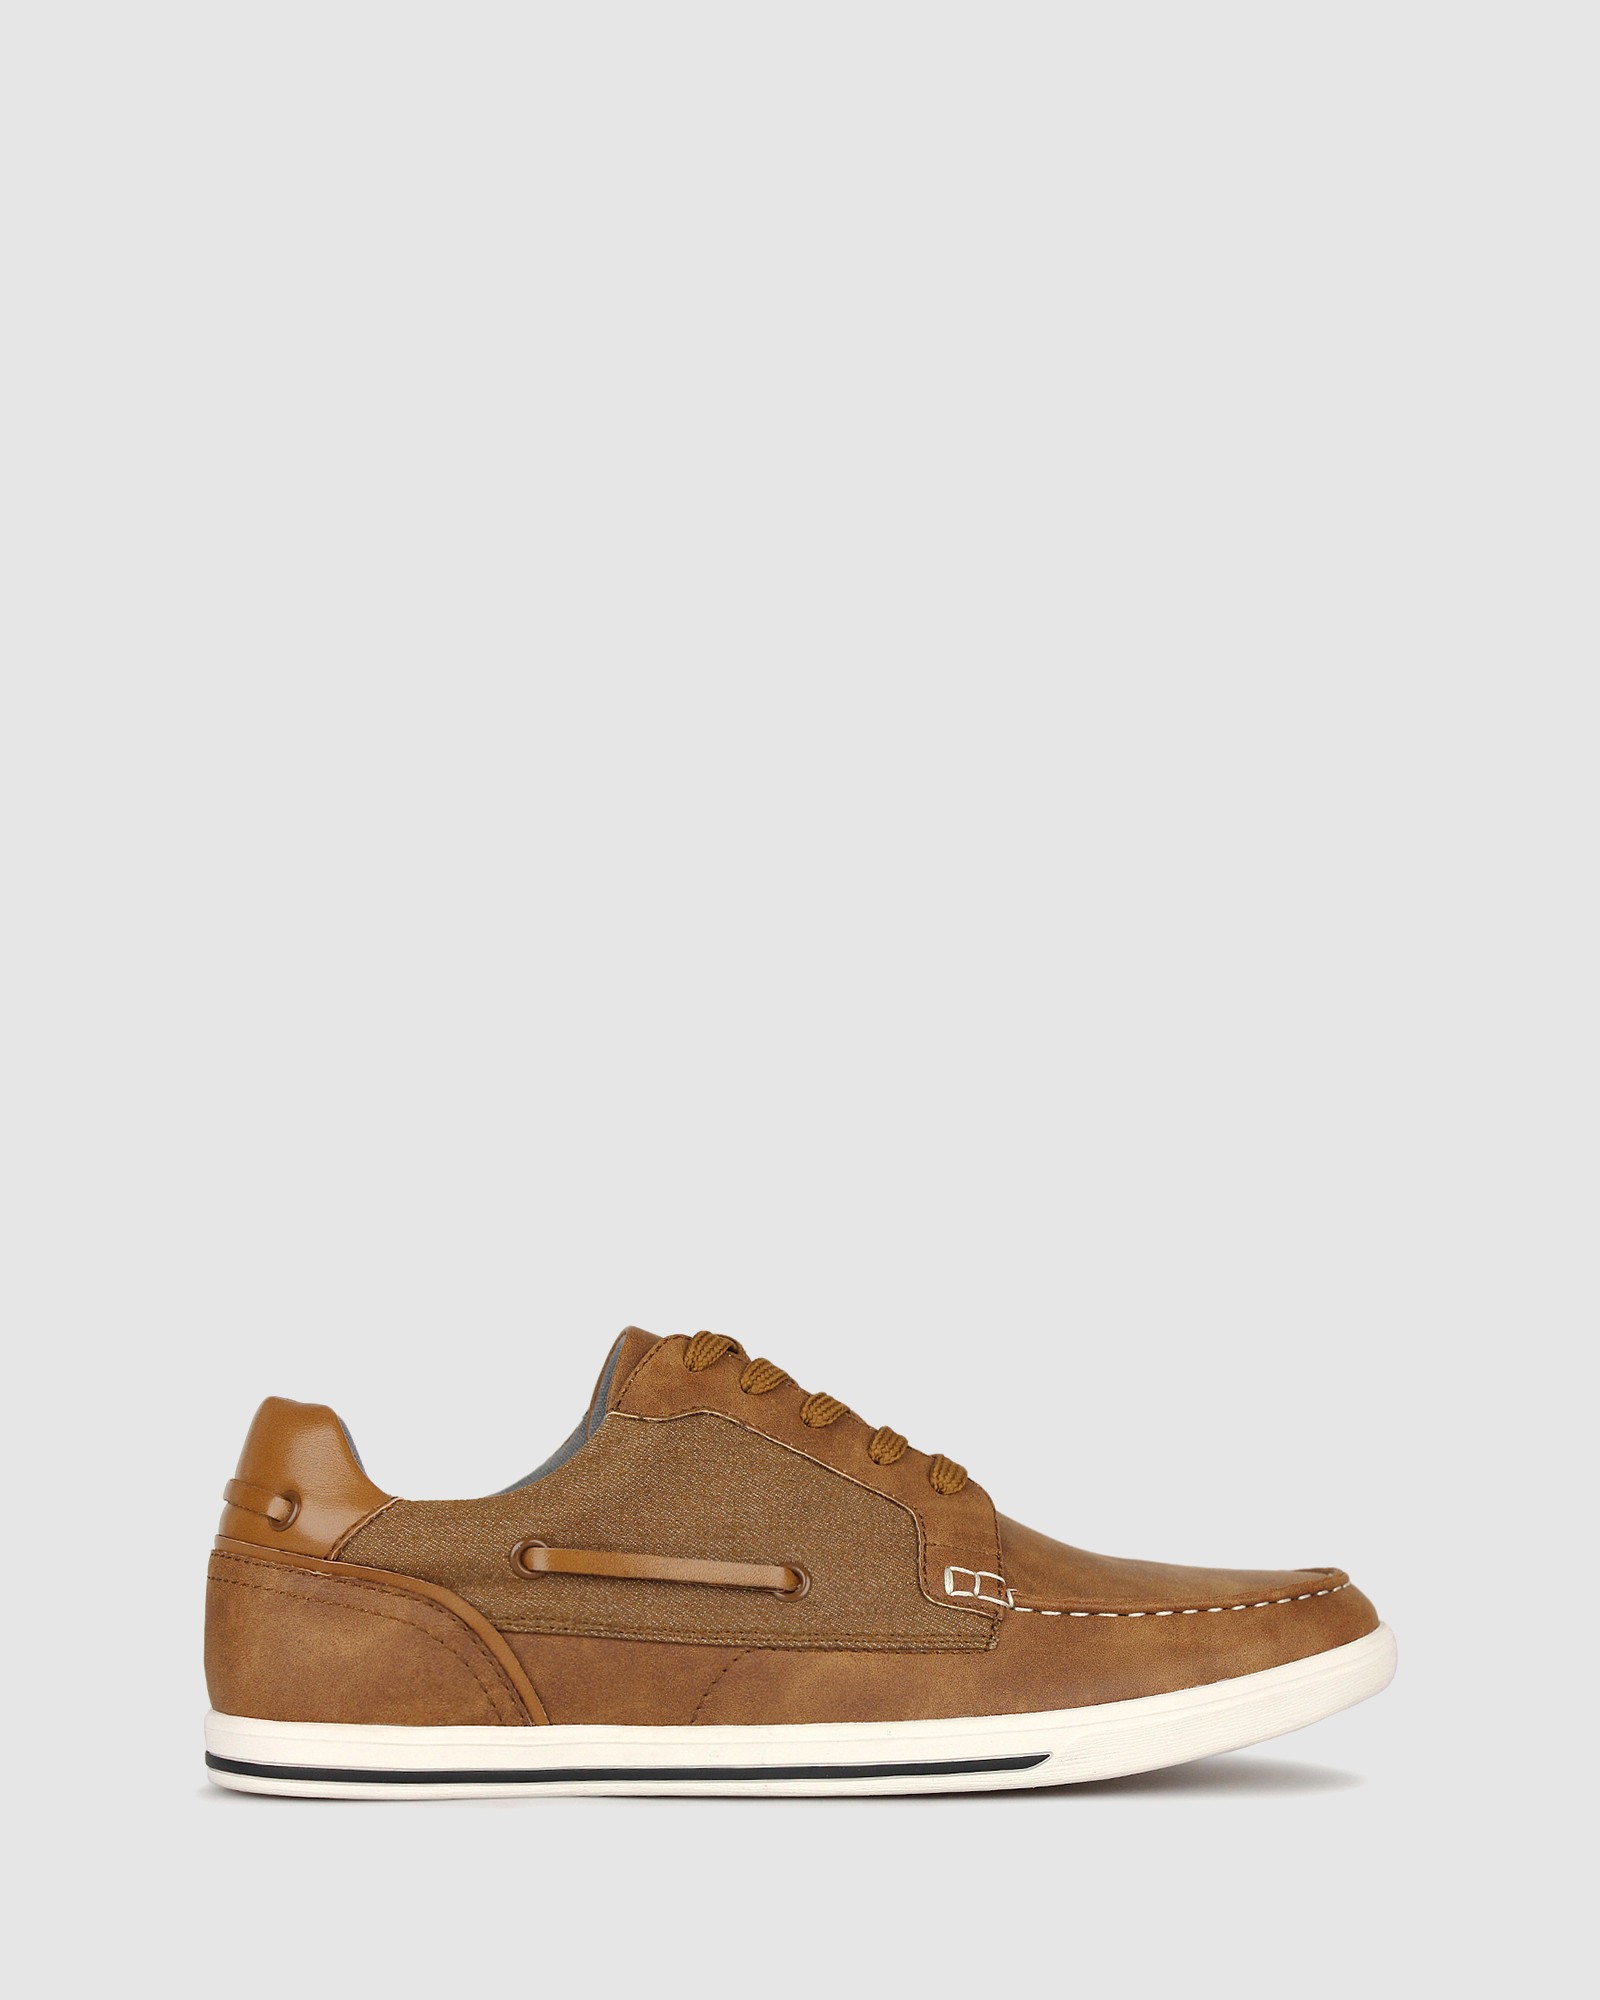 Visage Lifestyle Boat Shoes Tan by Betts | ShoeSales